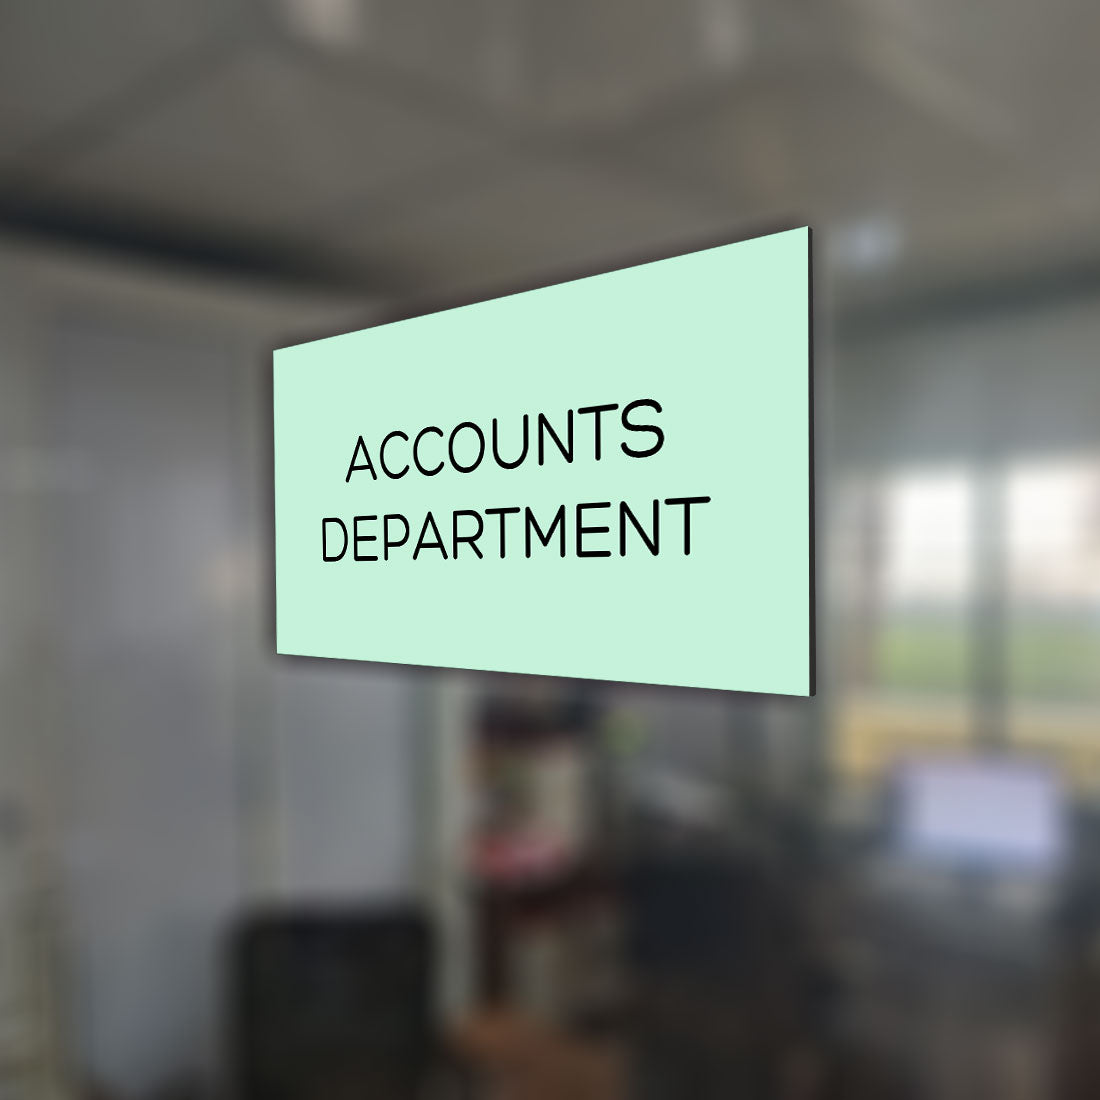 Customized Office Name Board Design for Corporate Offices - Accounts